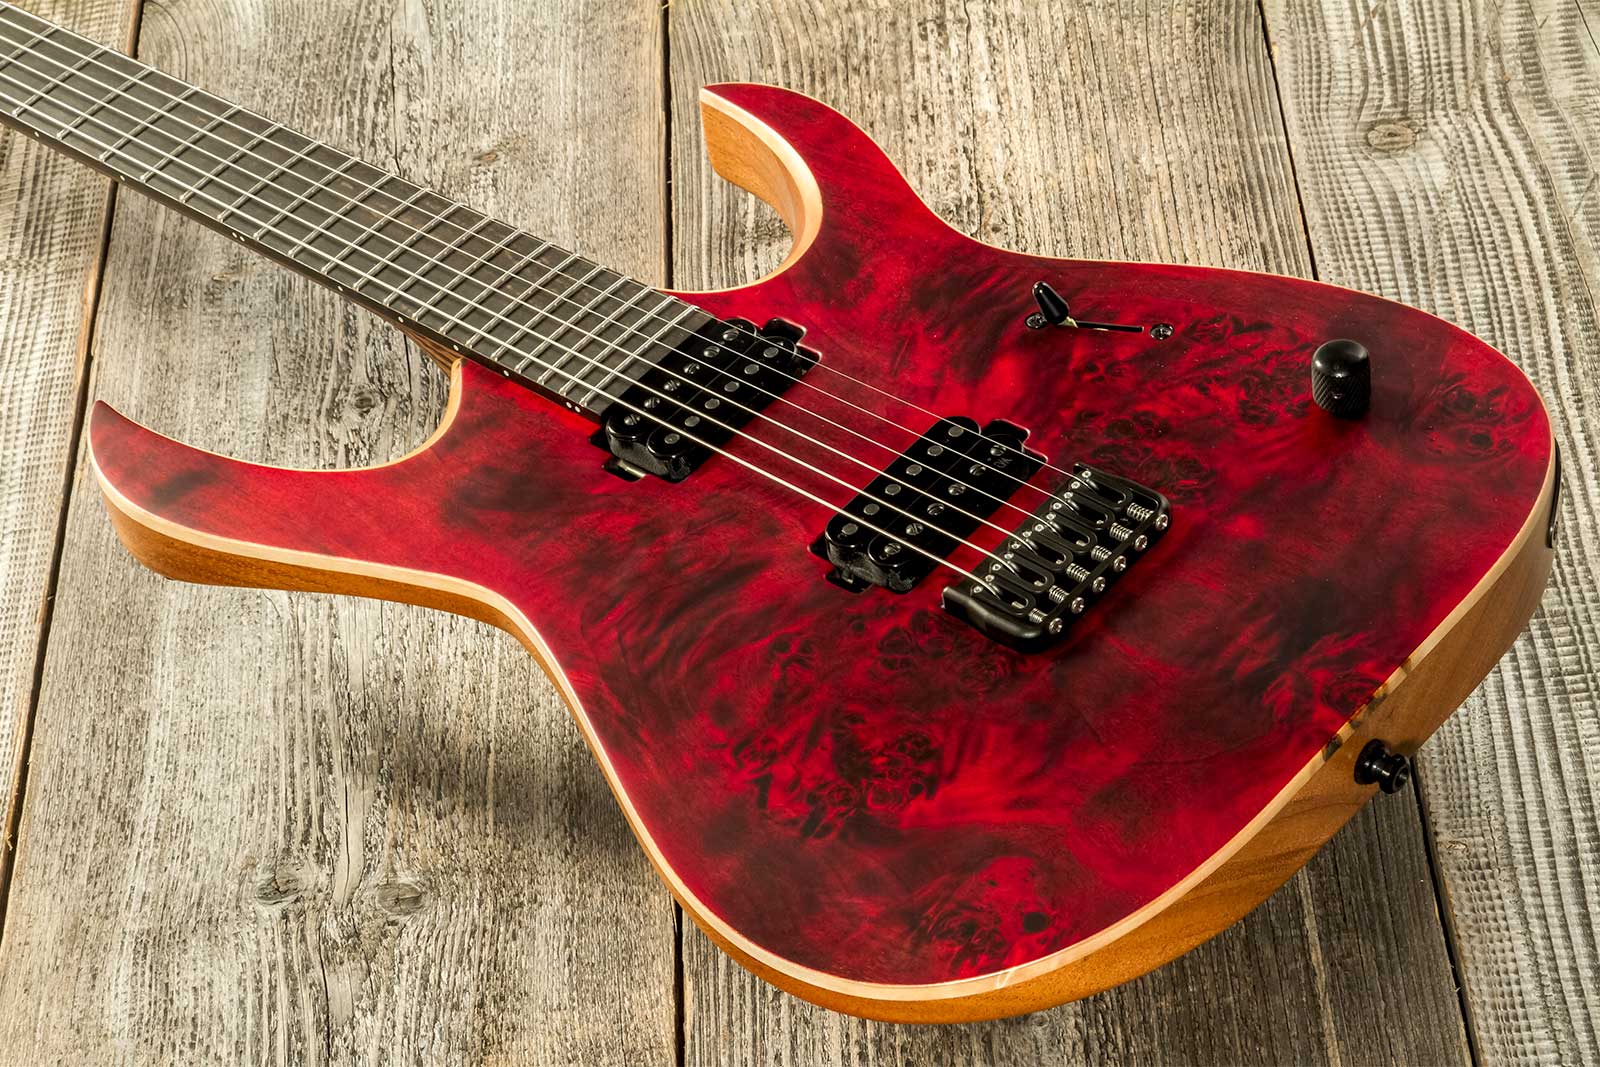 Mayones Guitars Duvell Elite 6 2h Bare Knuckle Ht Eb #df2301294 - Trans Dirty Red Satine - Guitarra electrica metalica - Variation 2